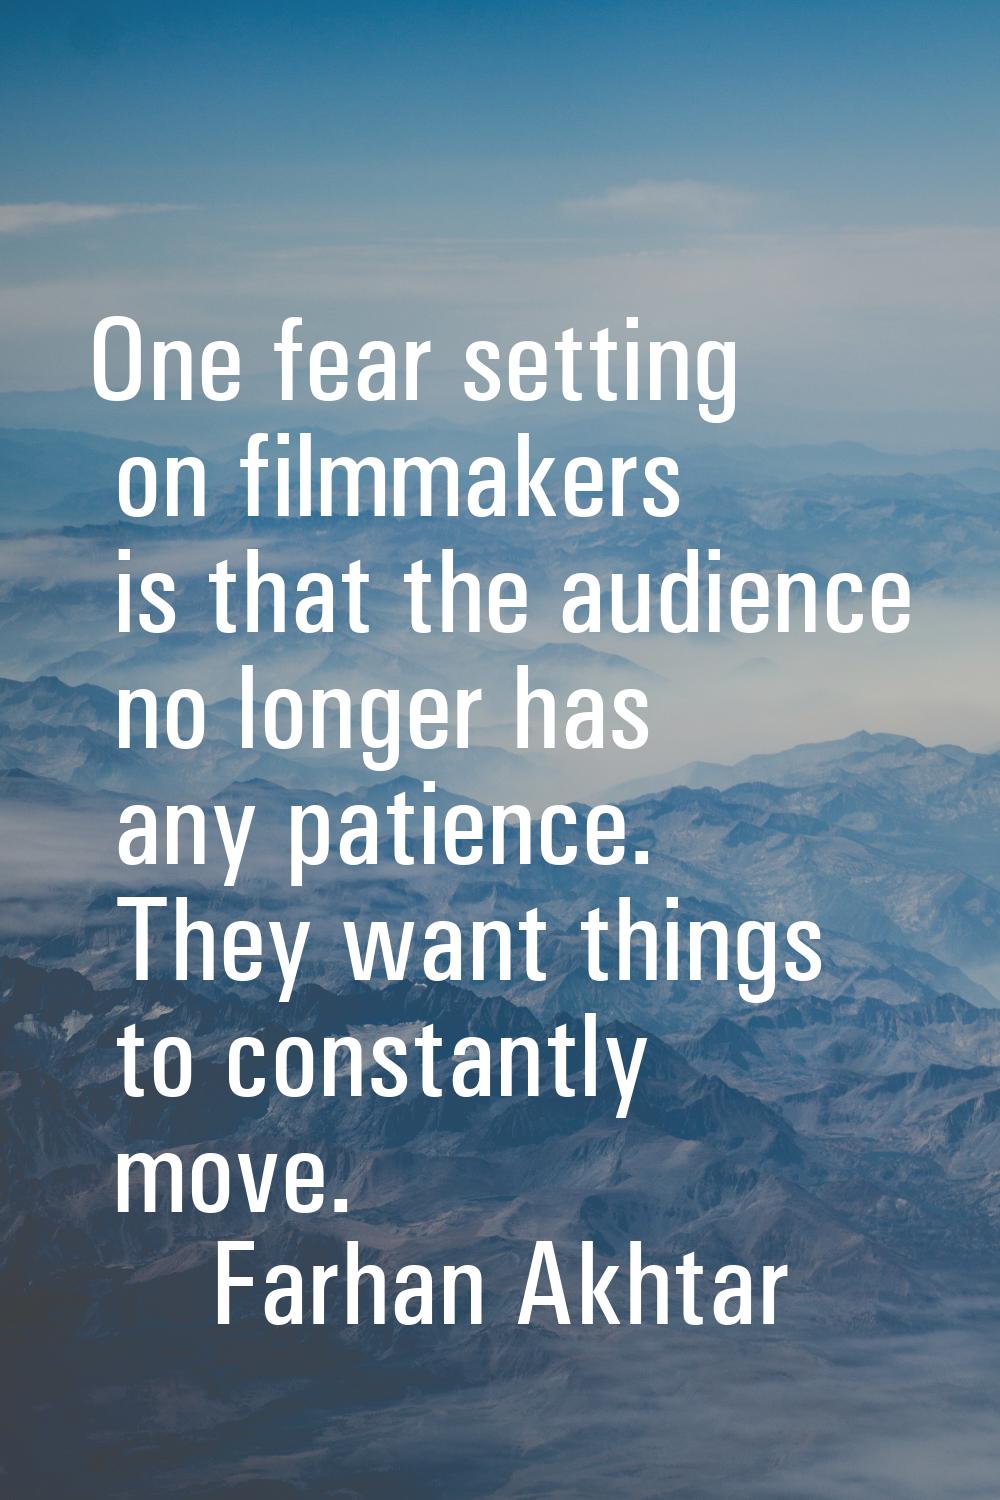 One fear setting on filmmakers is that the audience no longer has any patience. They want things to